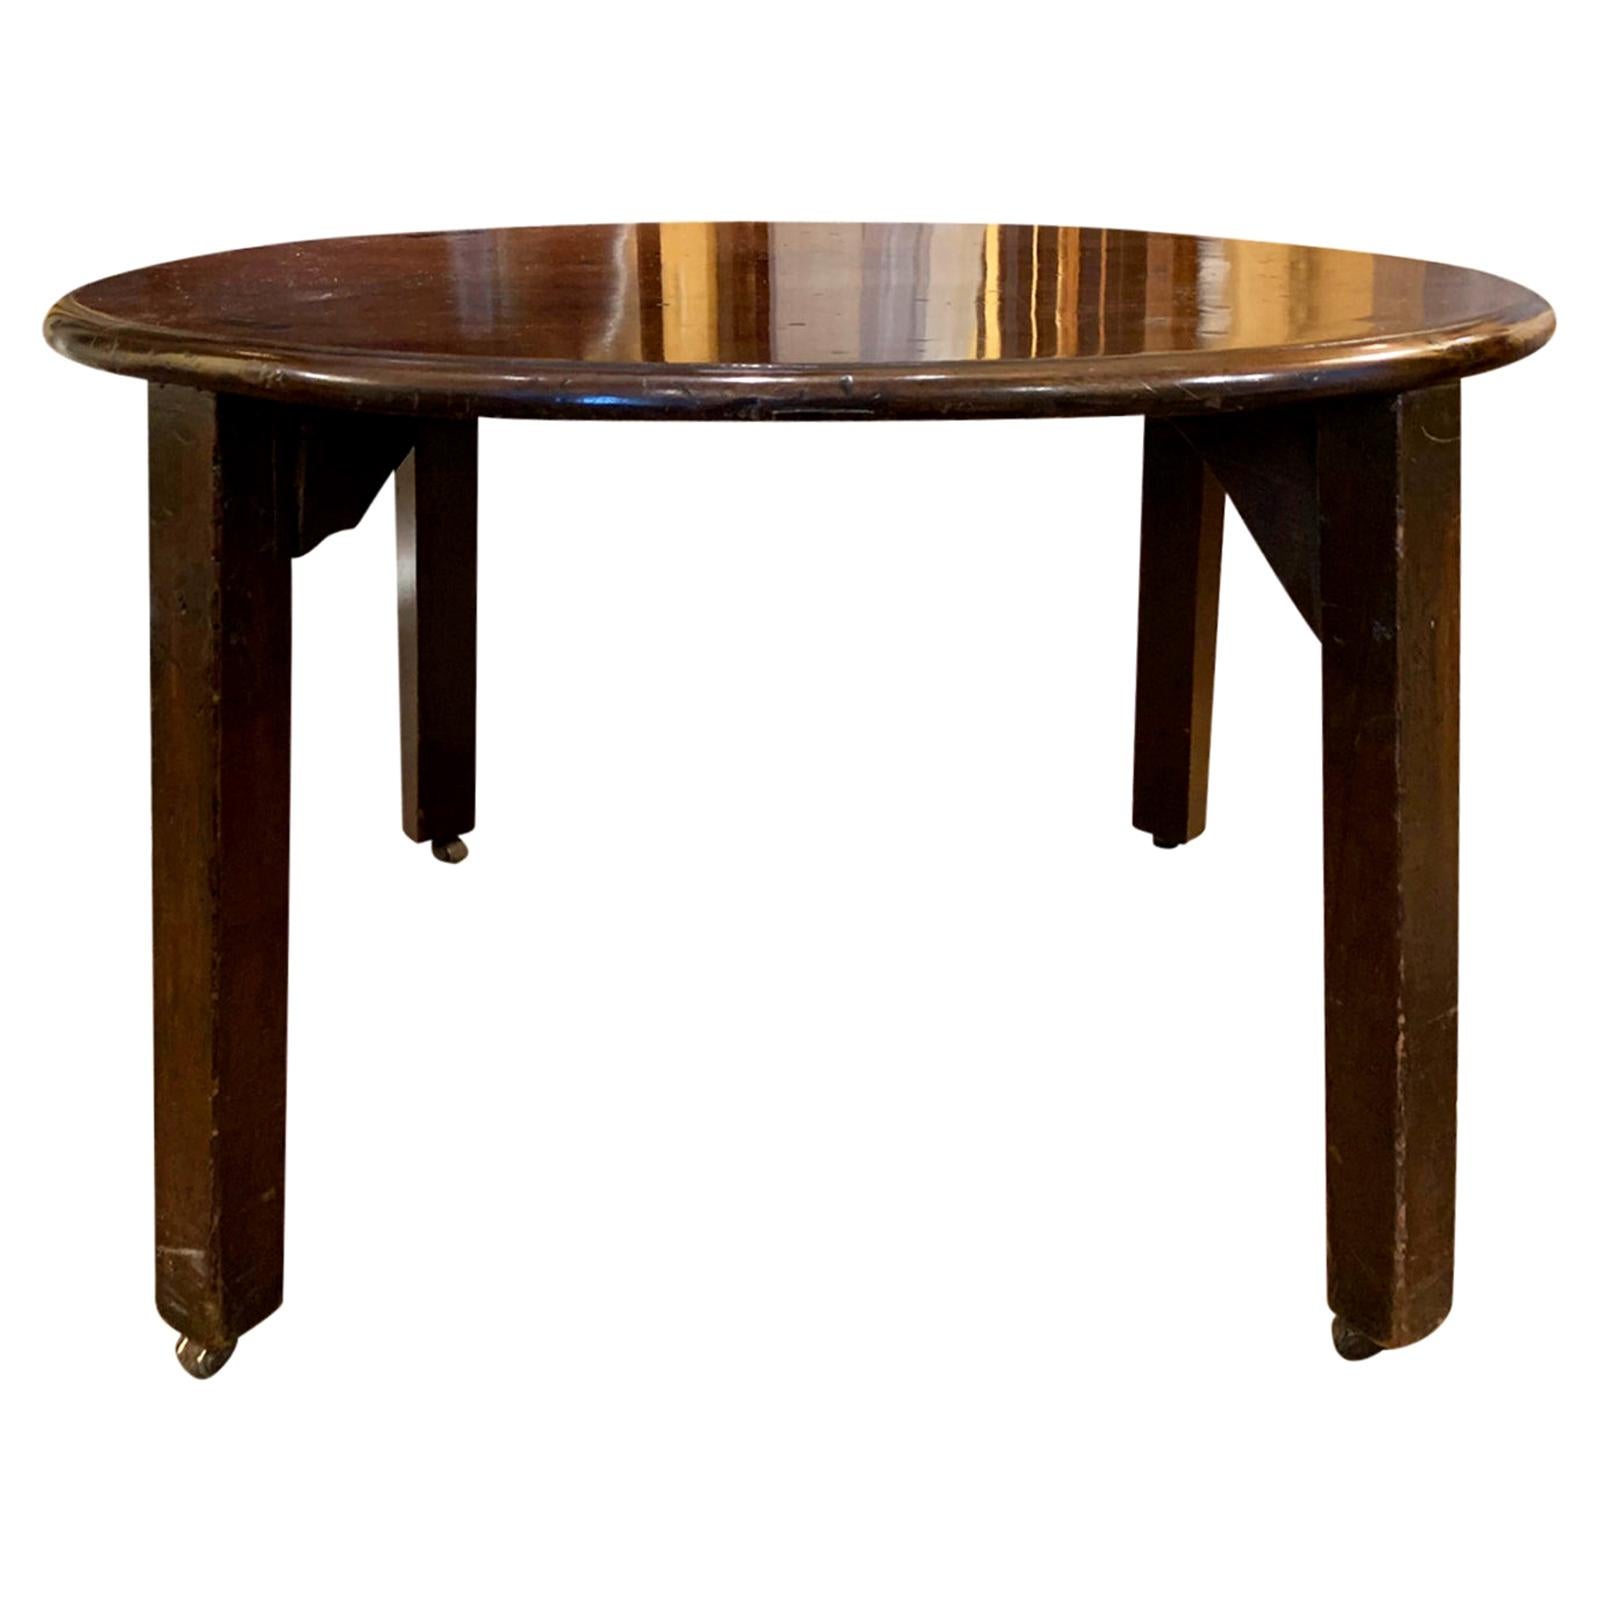 Early 19th Century Provincial English Oval Coffee Table For Sale